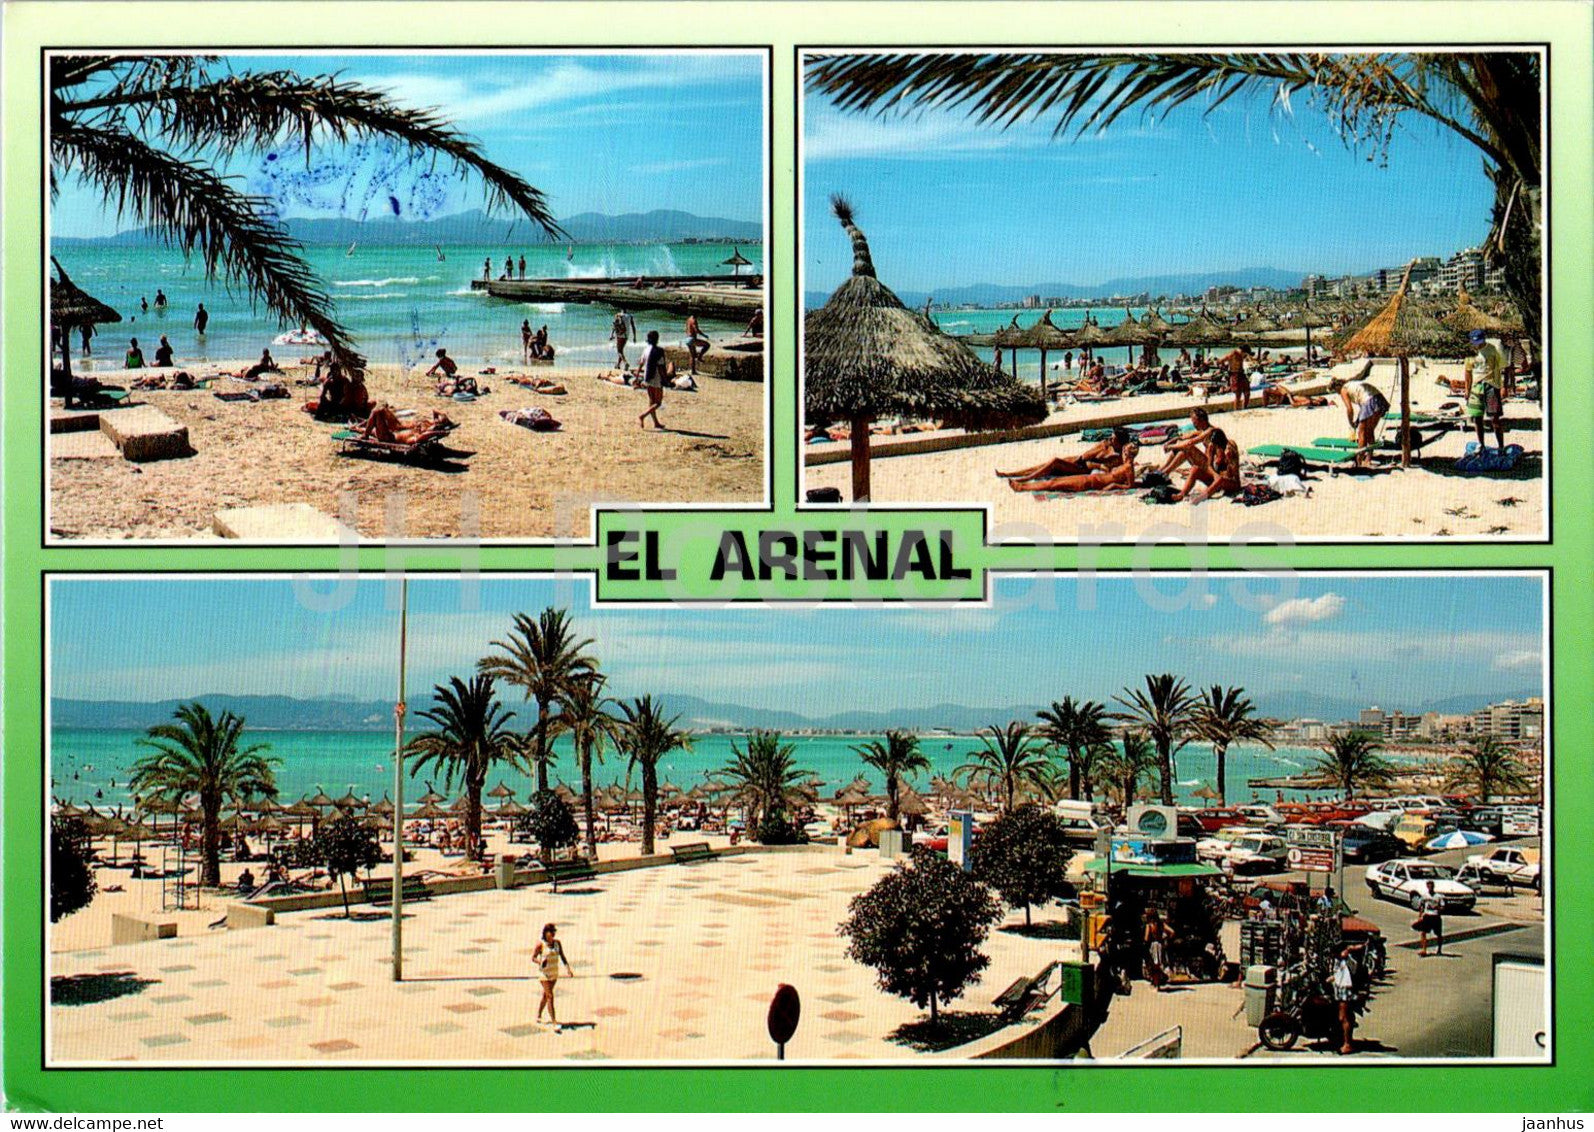 El Arenal - Mallorca - multiview - 403 -2001 - Spain - used - JH Postcards